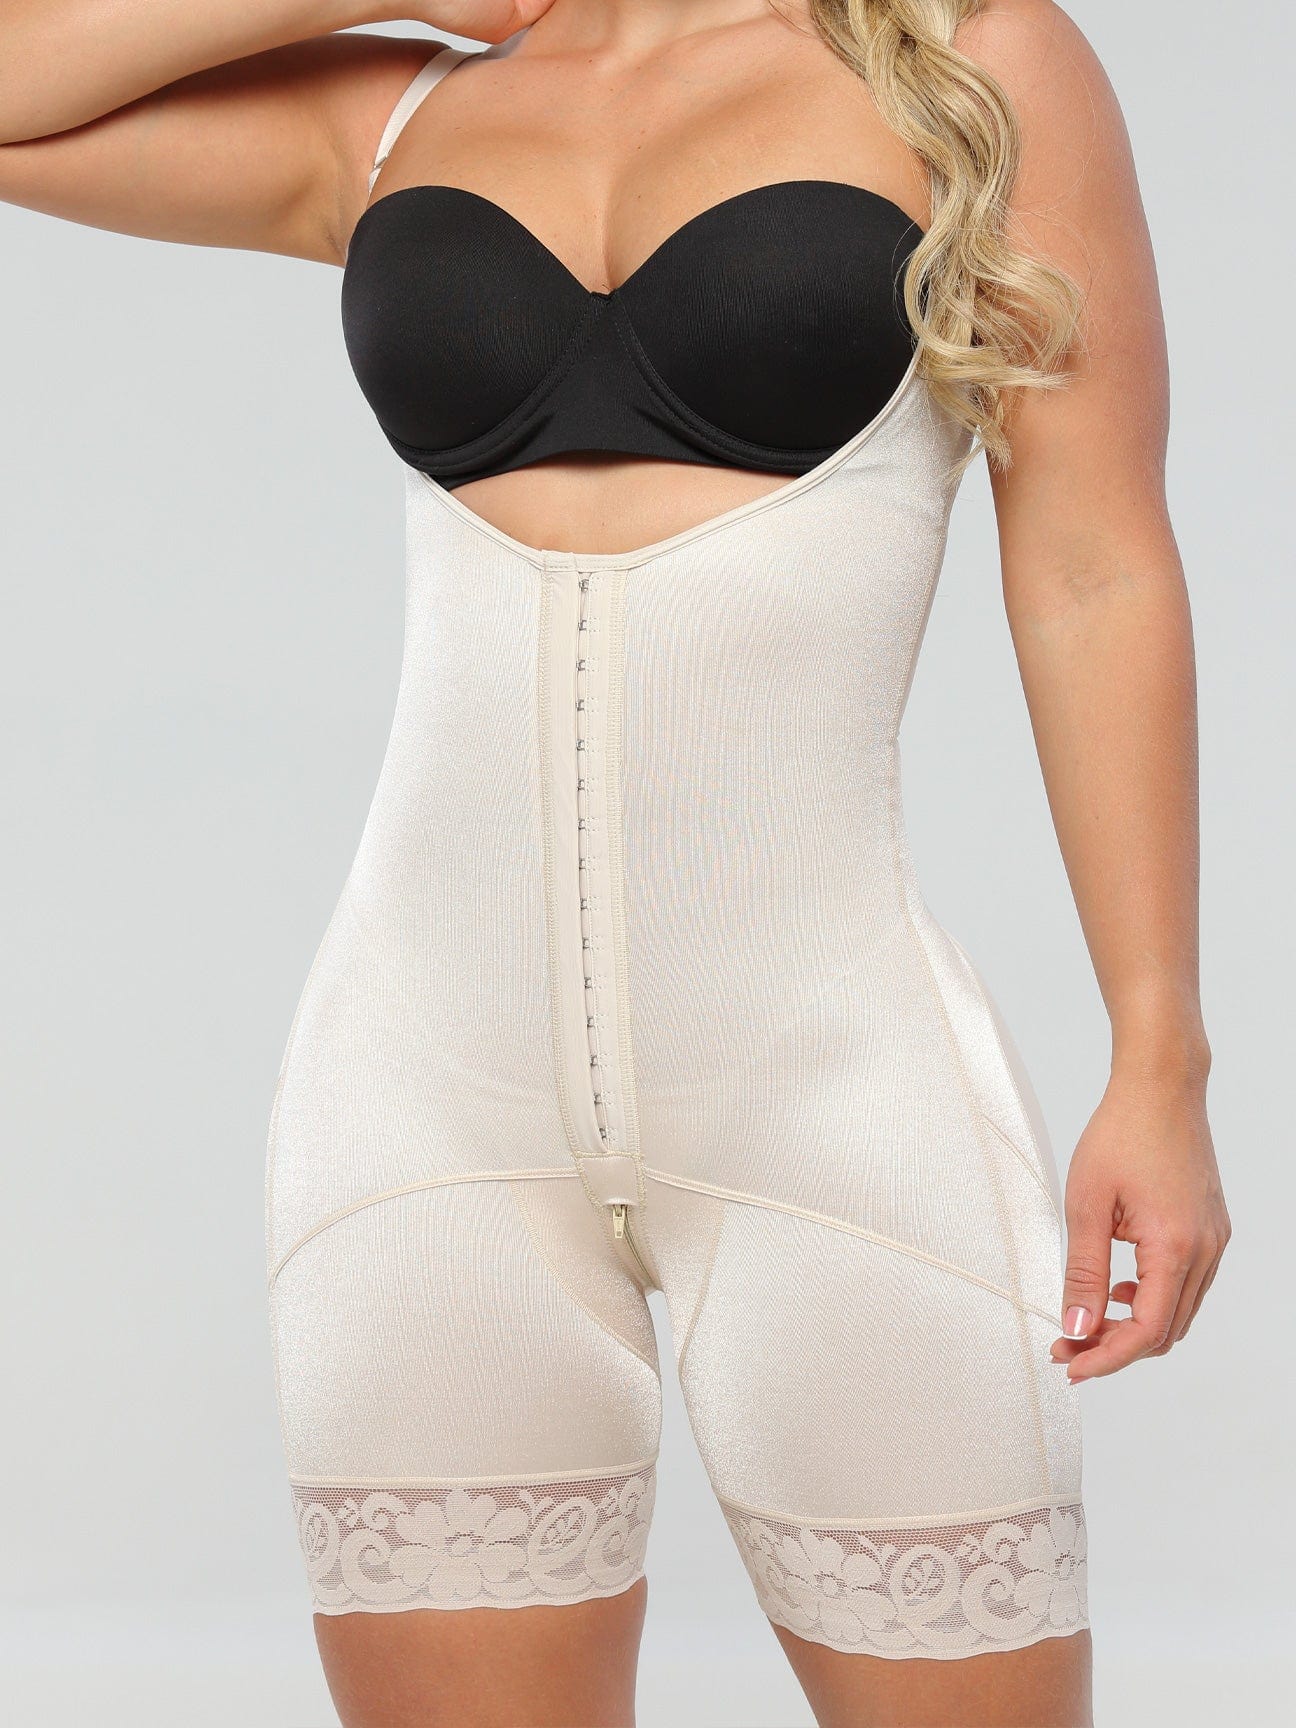 Smooth Compression Faja For Comfort with Hooks